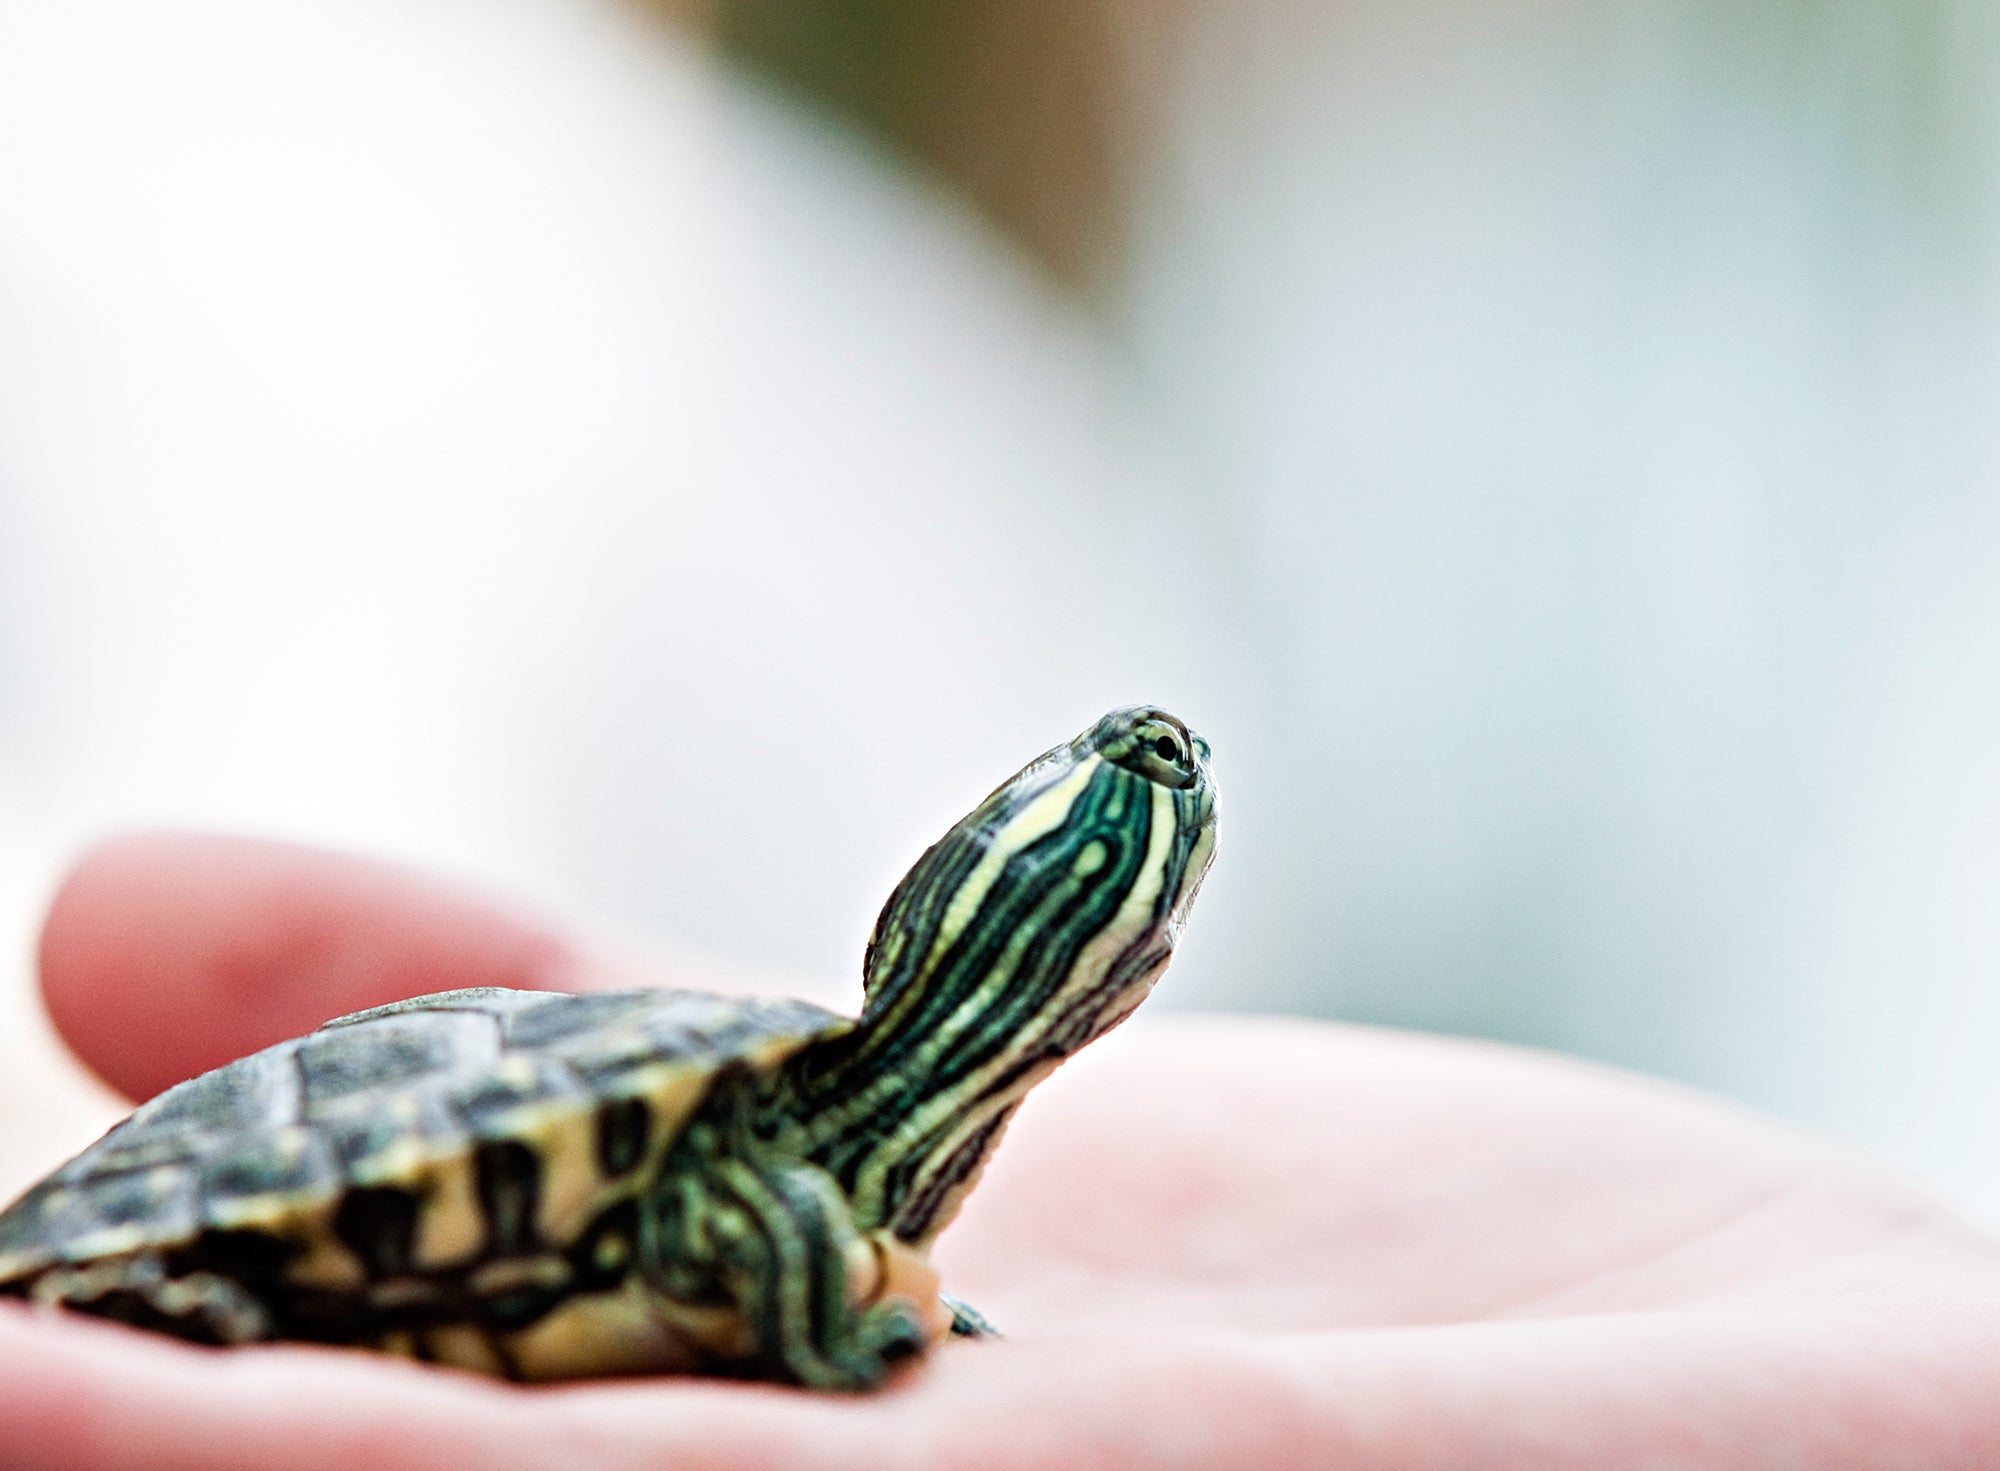 How to Care for a Pet Turtle?